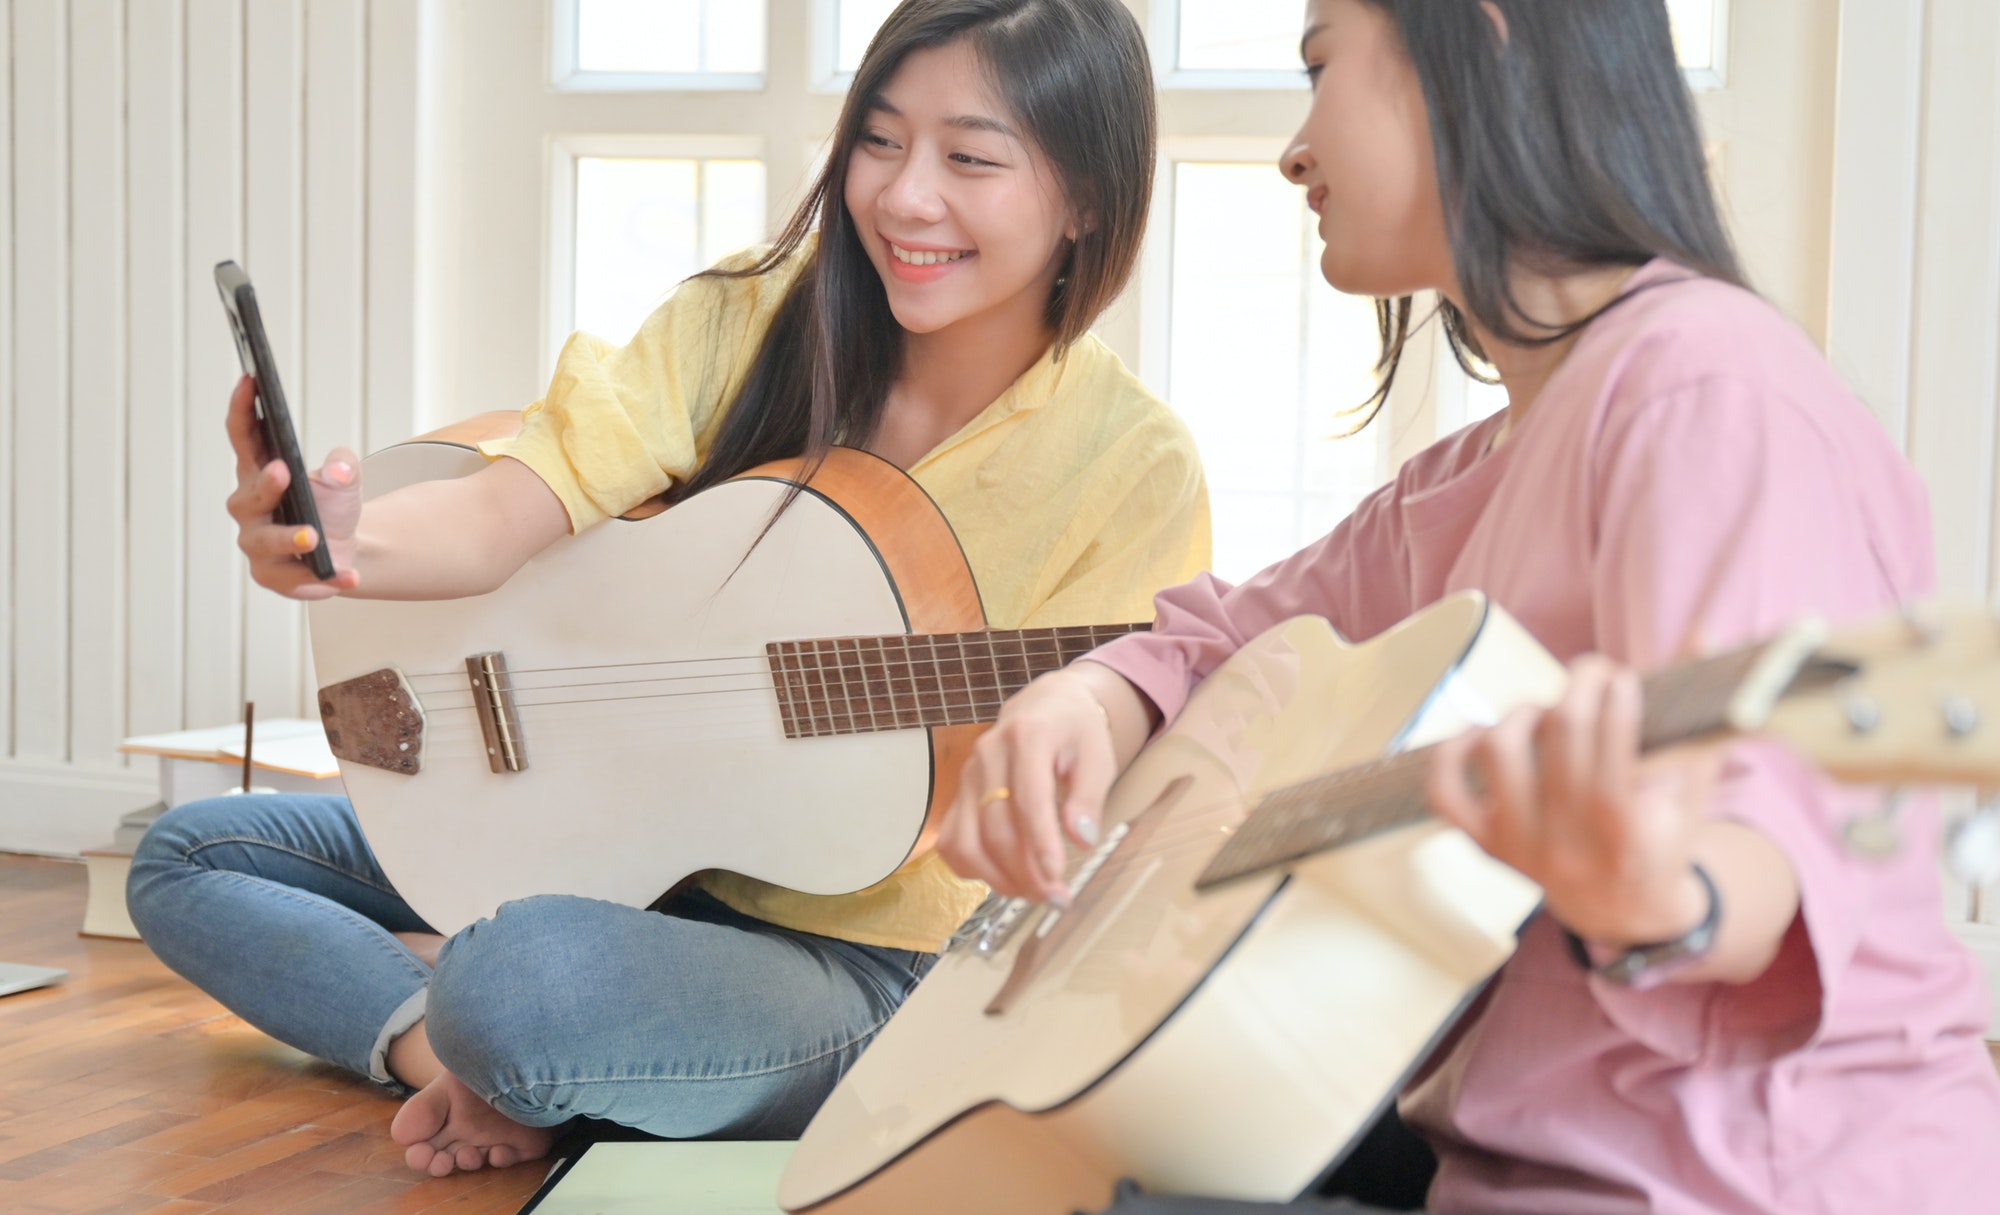 Teenage girls and friends playing guitar and using a smartphone video call.